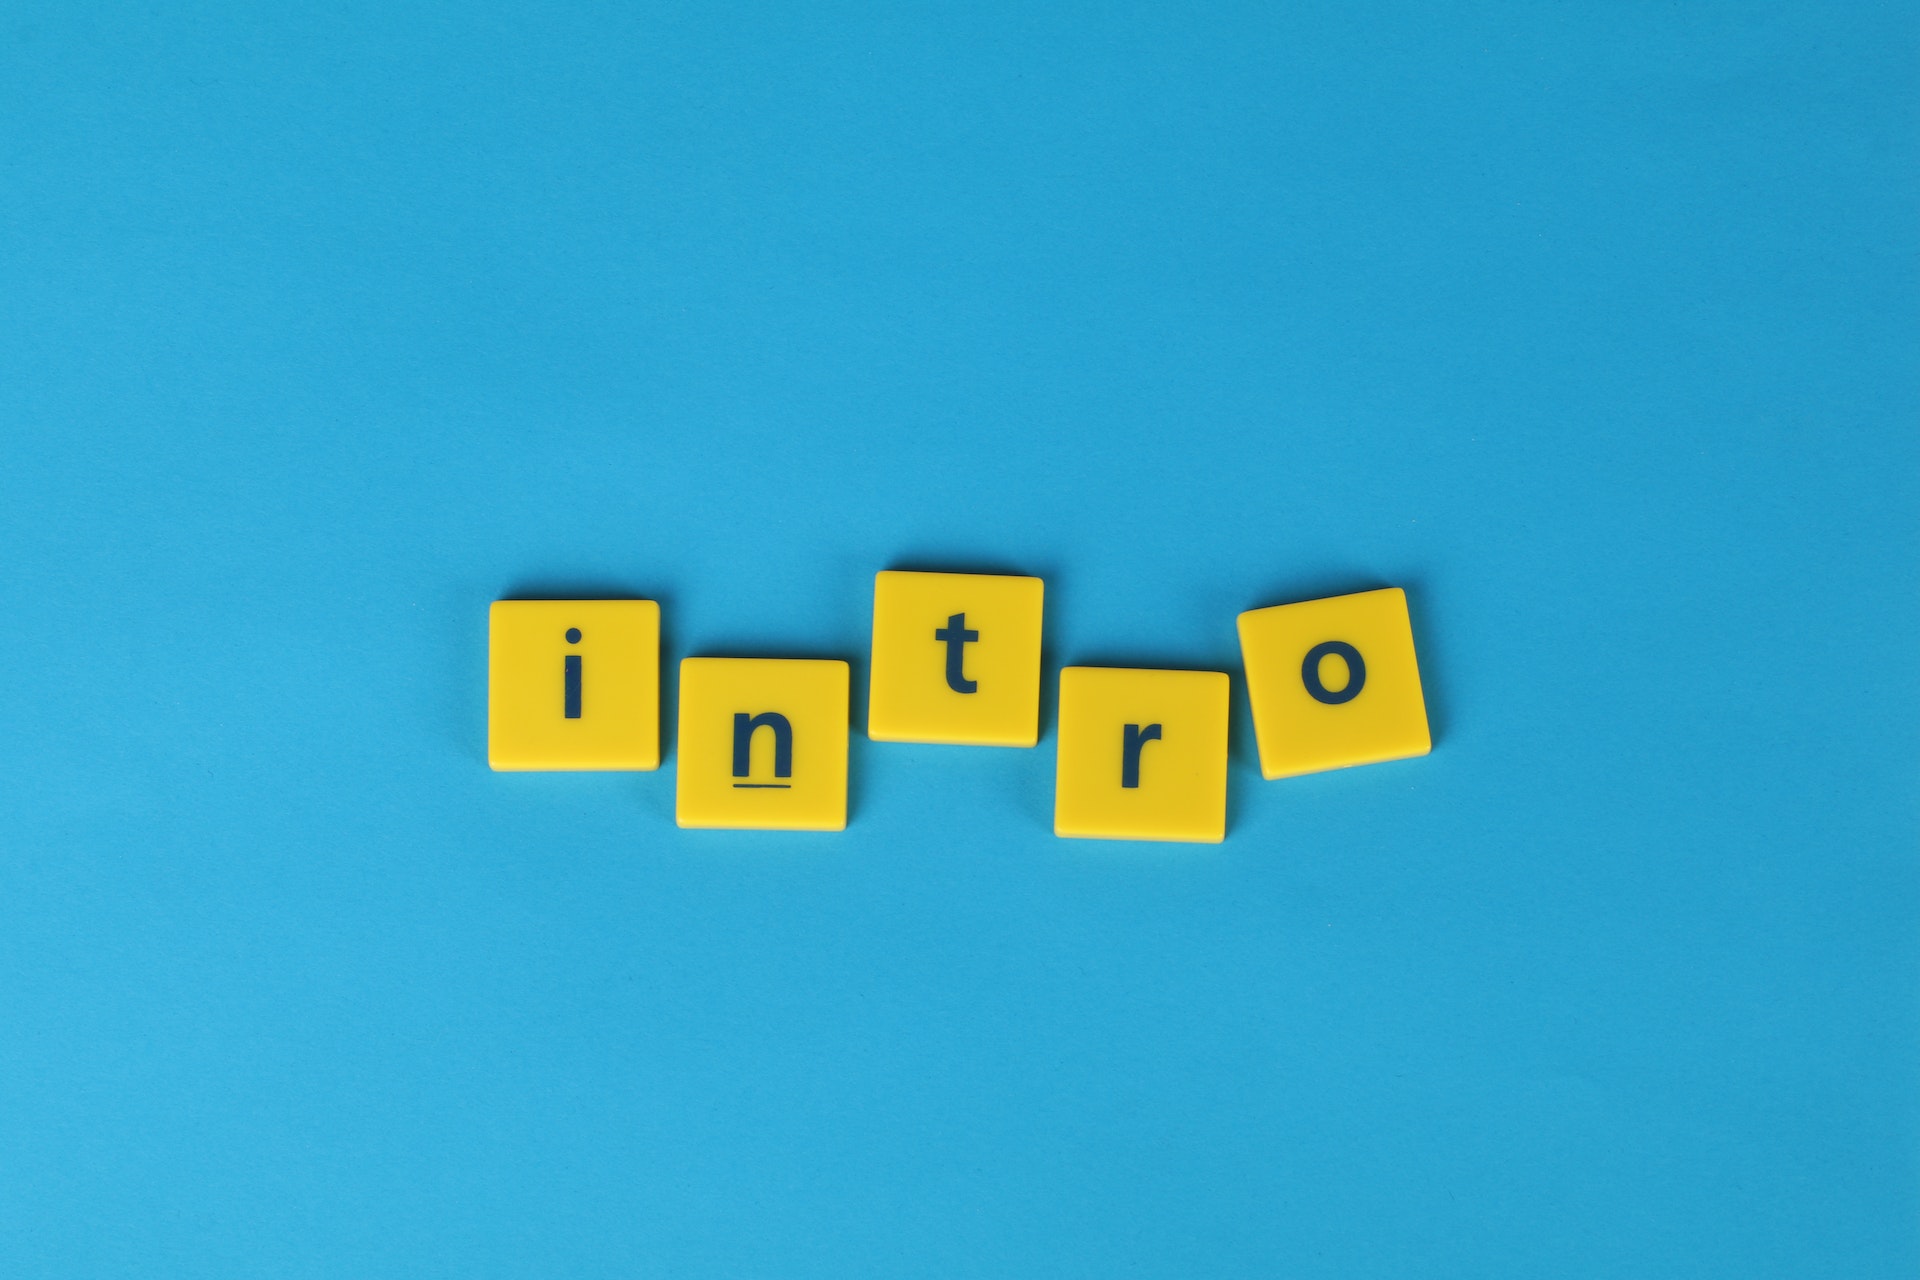 intro spelled out with letter blocks